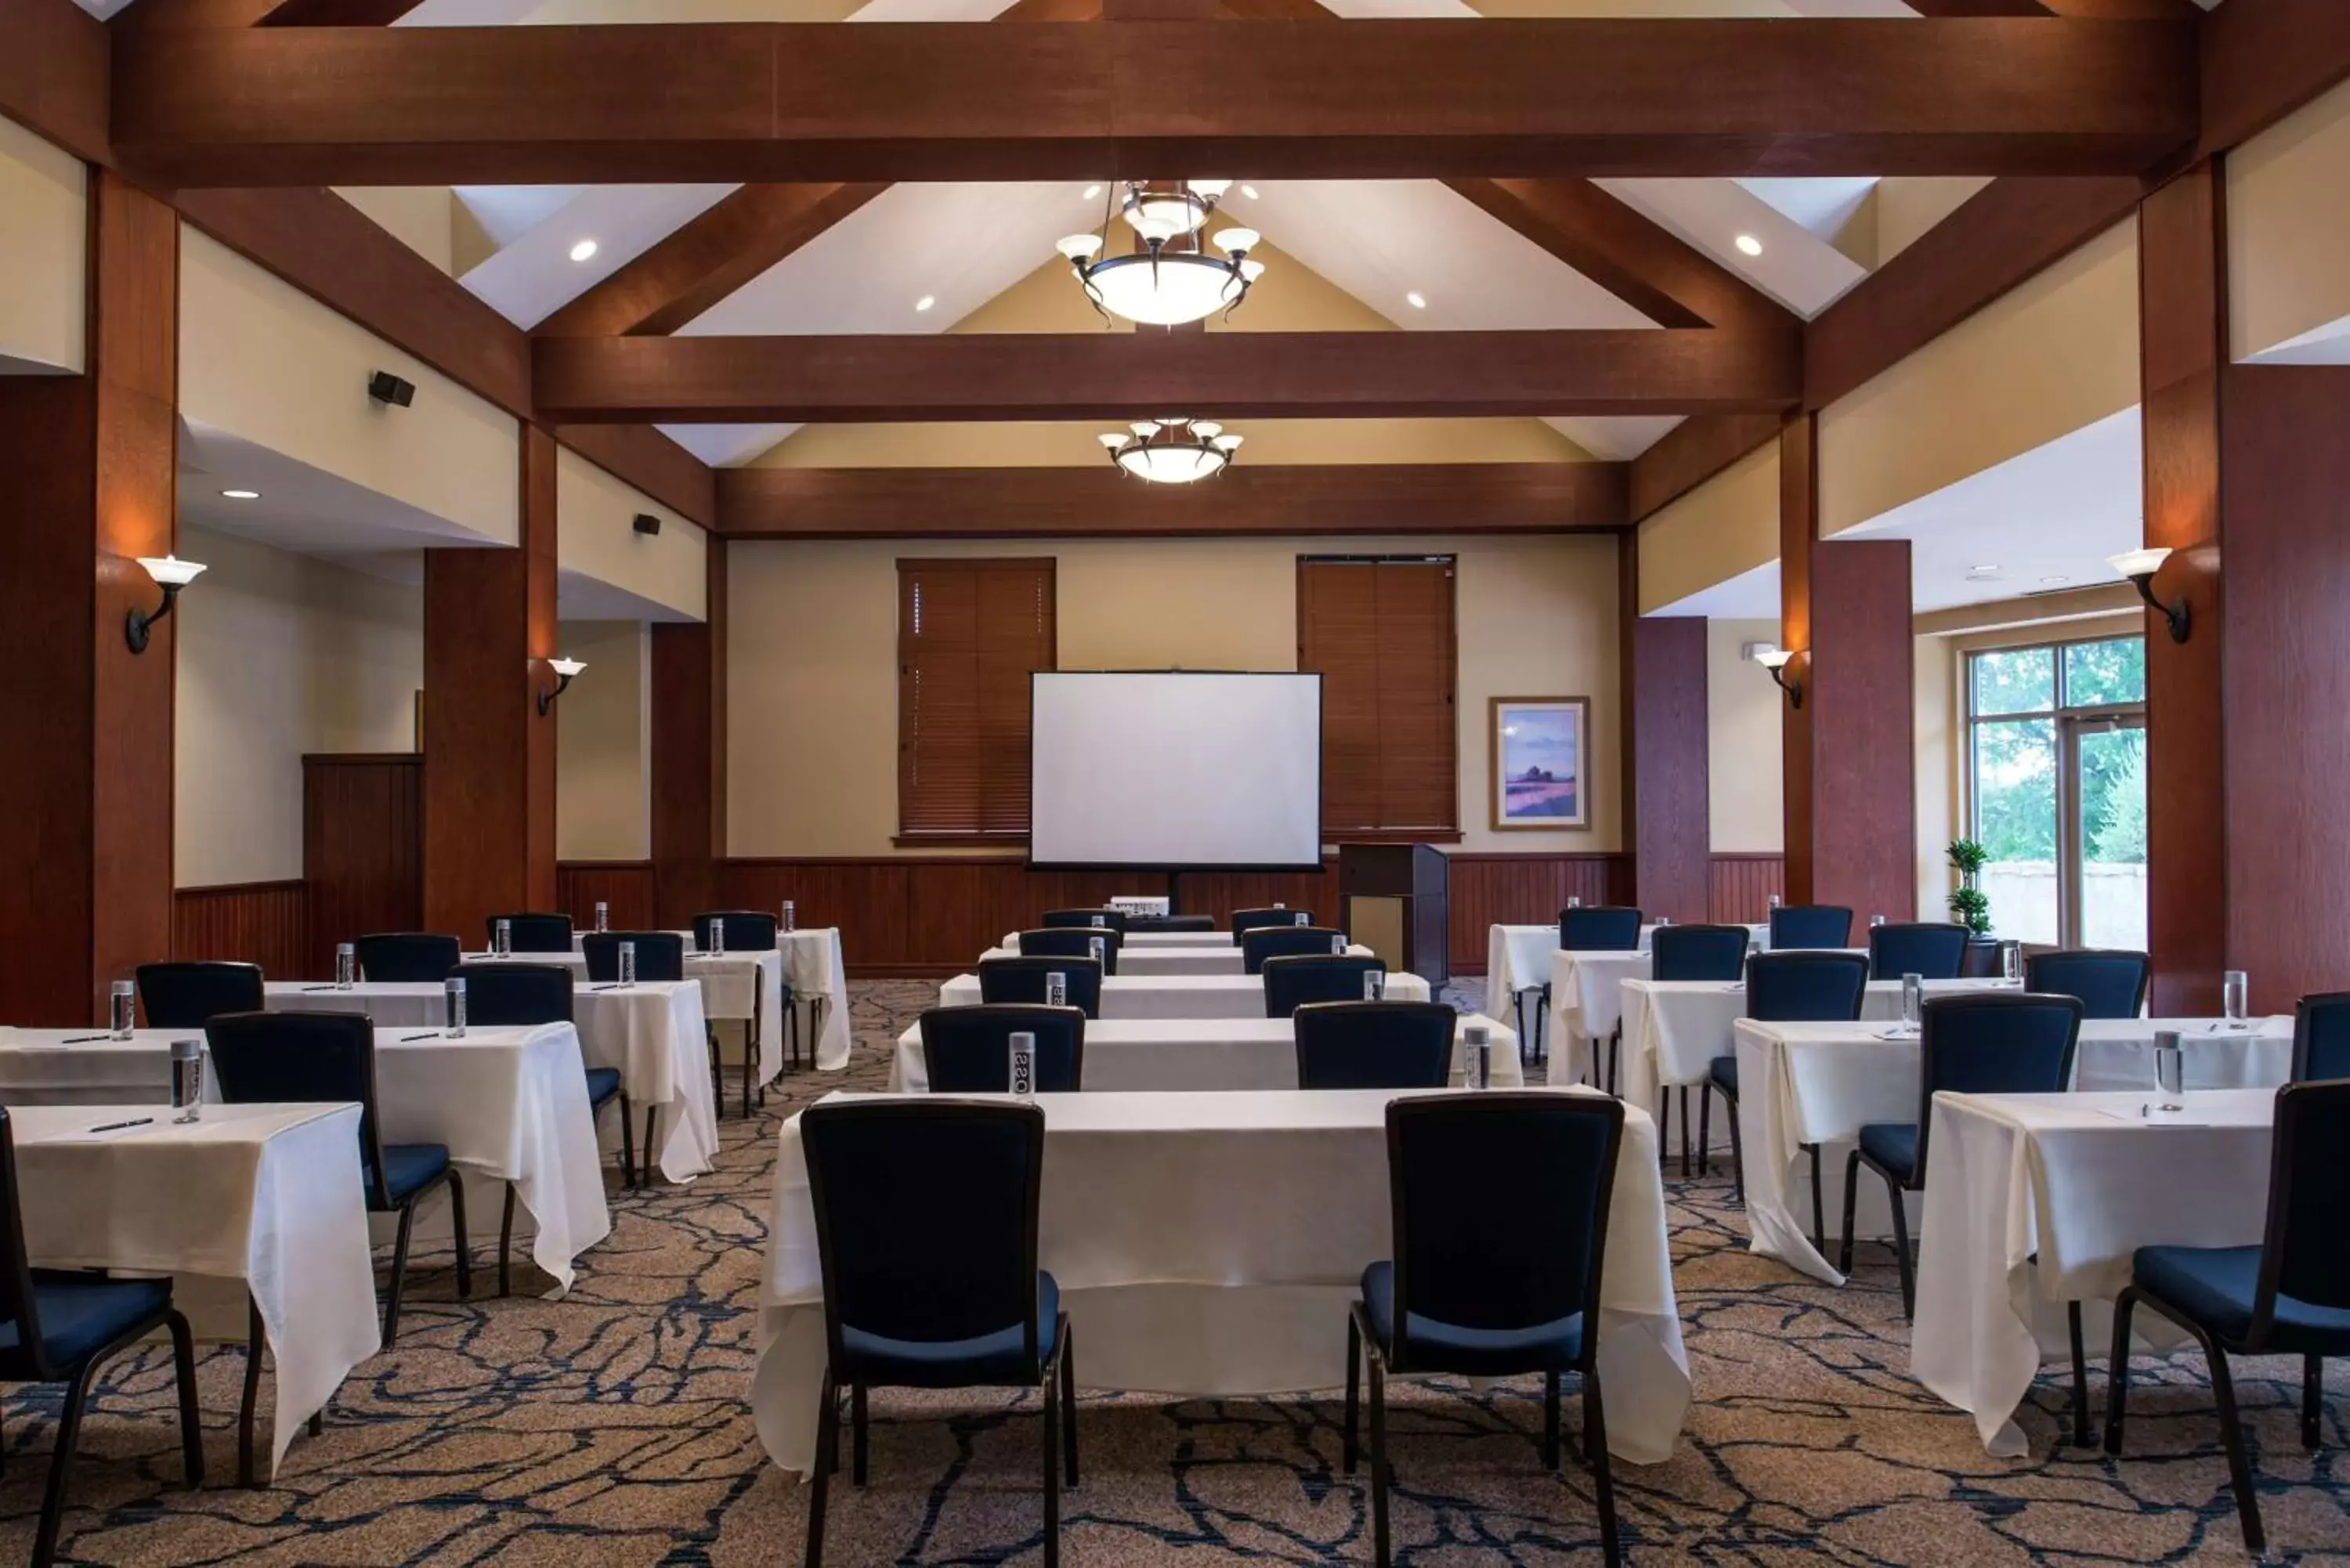 Meeting/conference room in Hilton San Antonio Hill Country